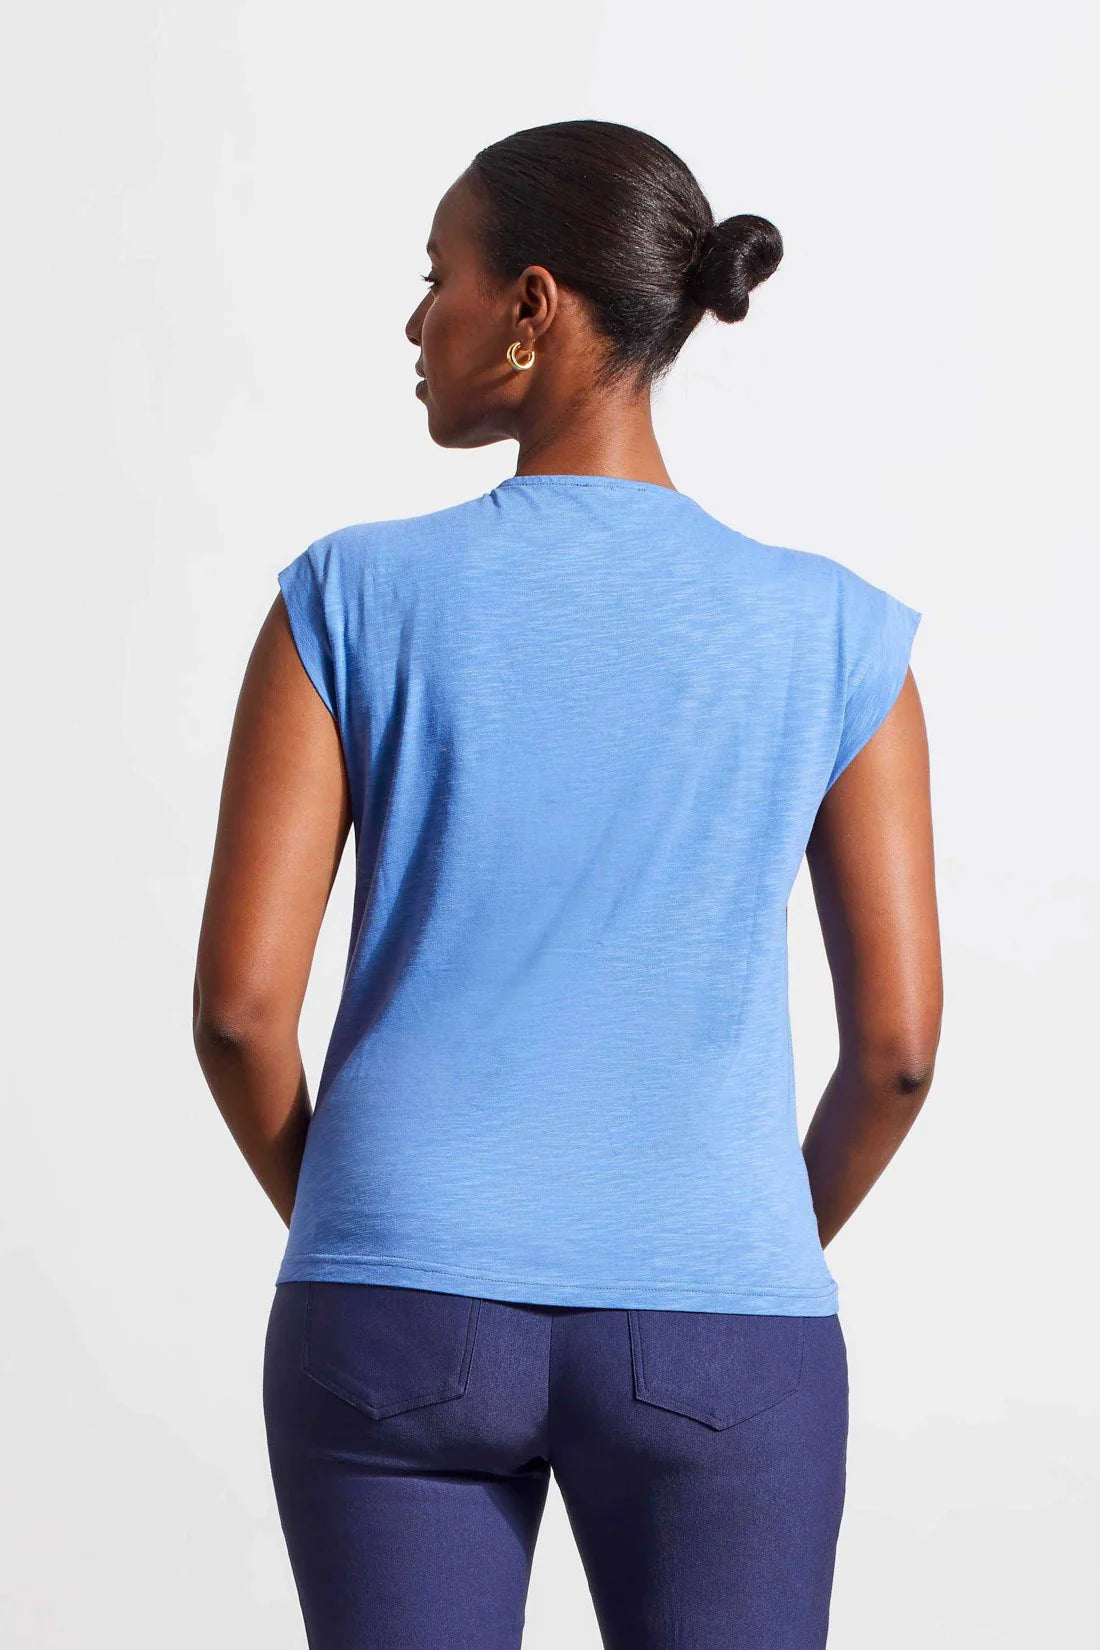 Blue Sleeveless V-Neck Top with Ruching